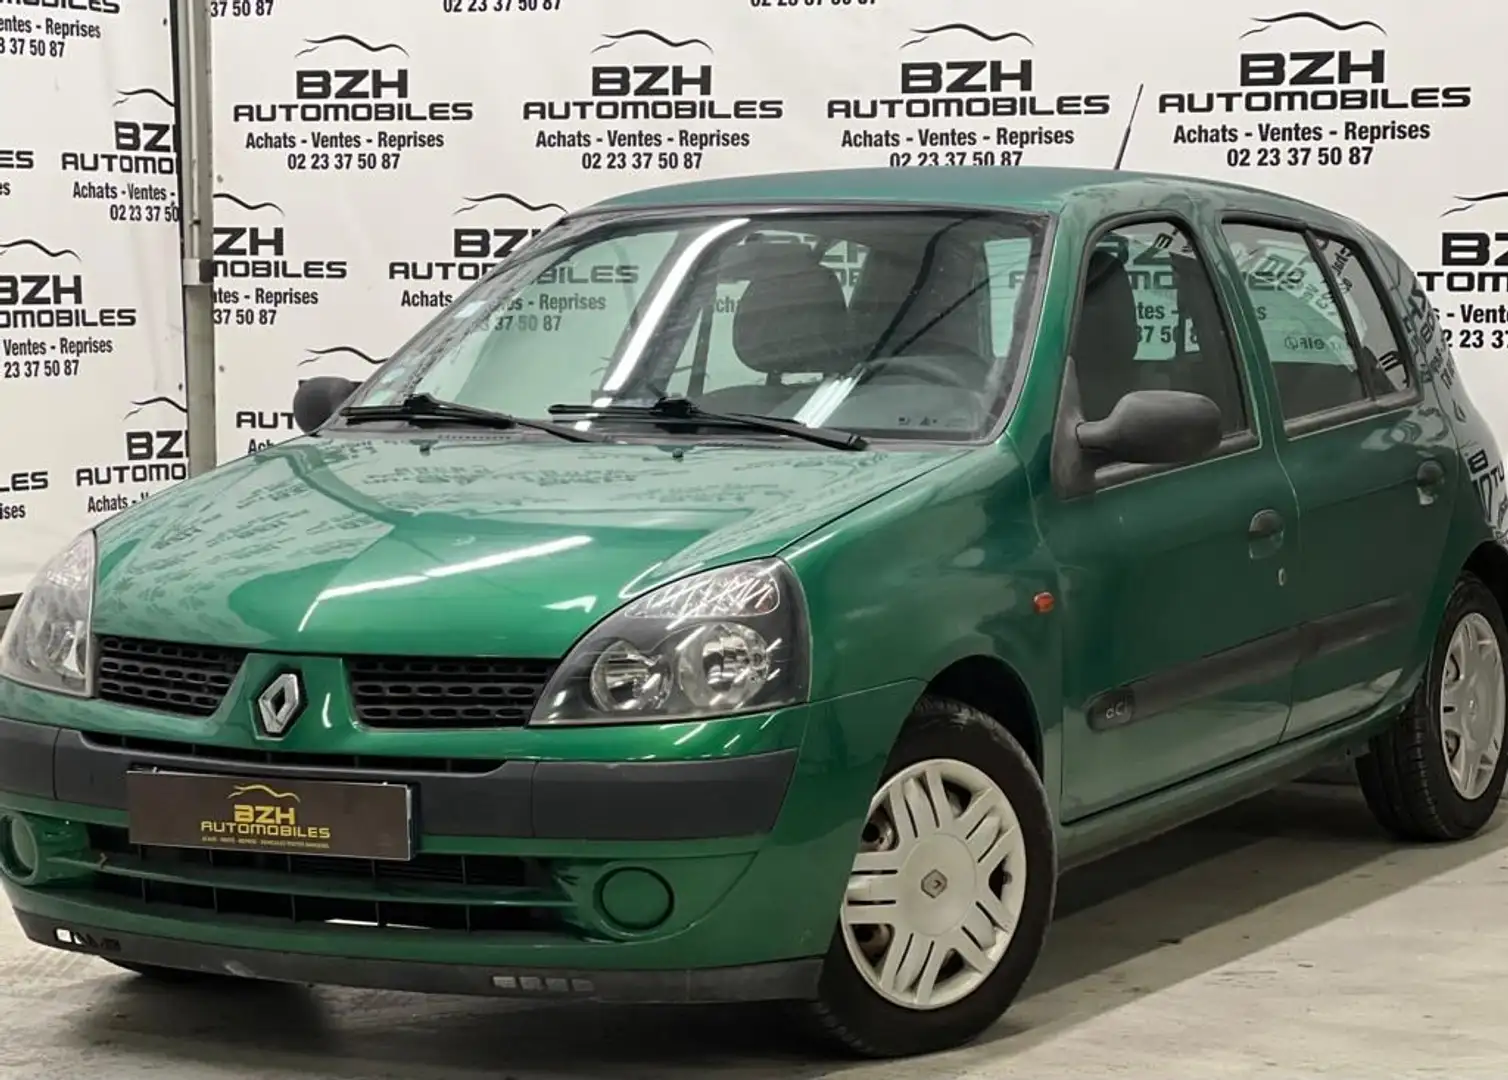 Renault Clio 1.5 DCI 65CH EXPRESSION 5P - 1